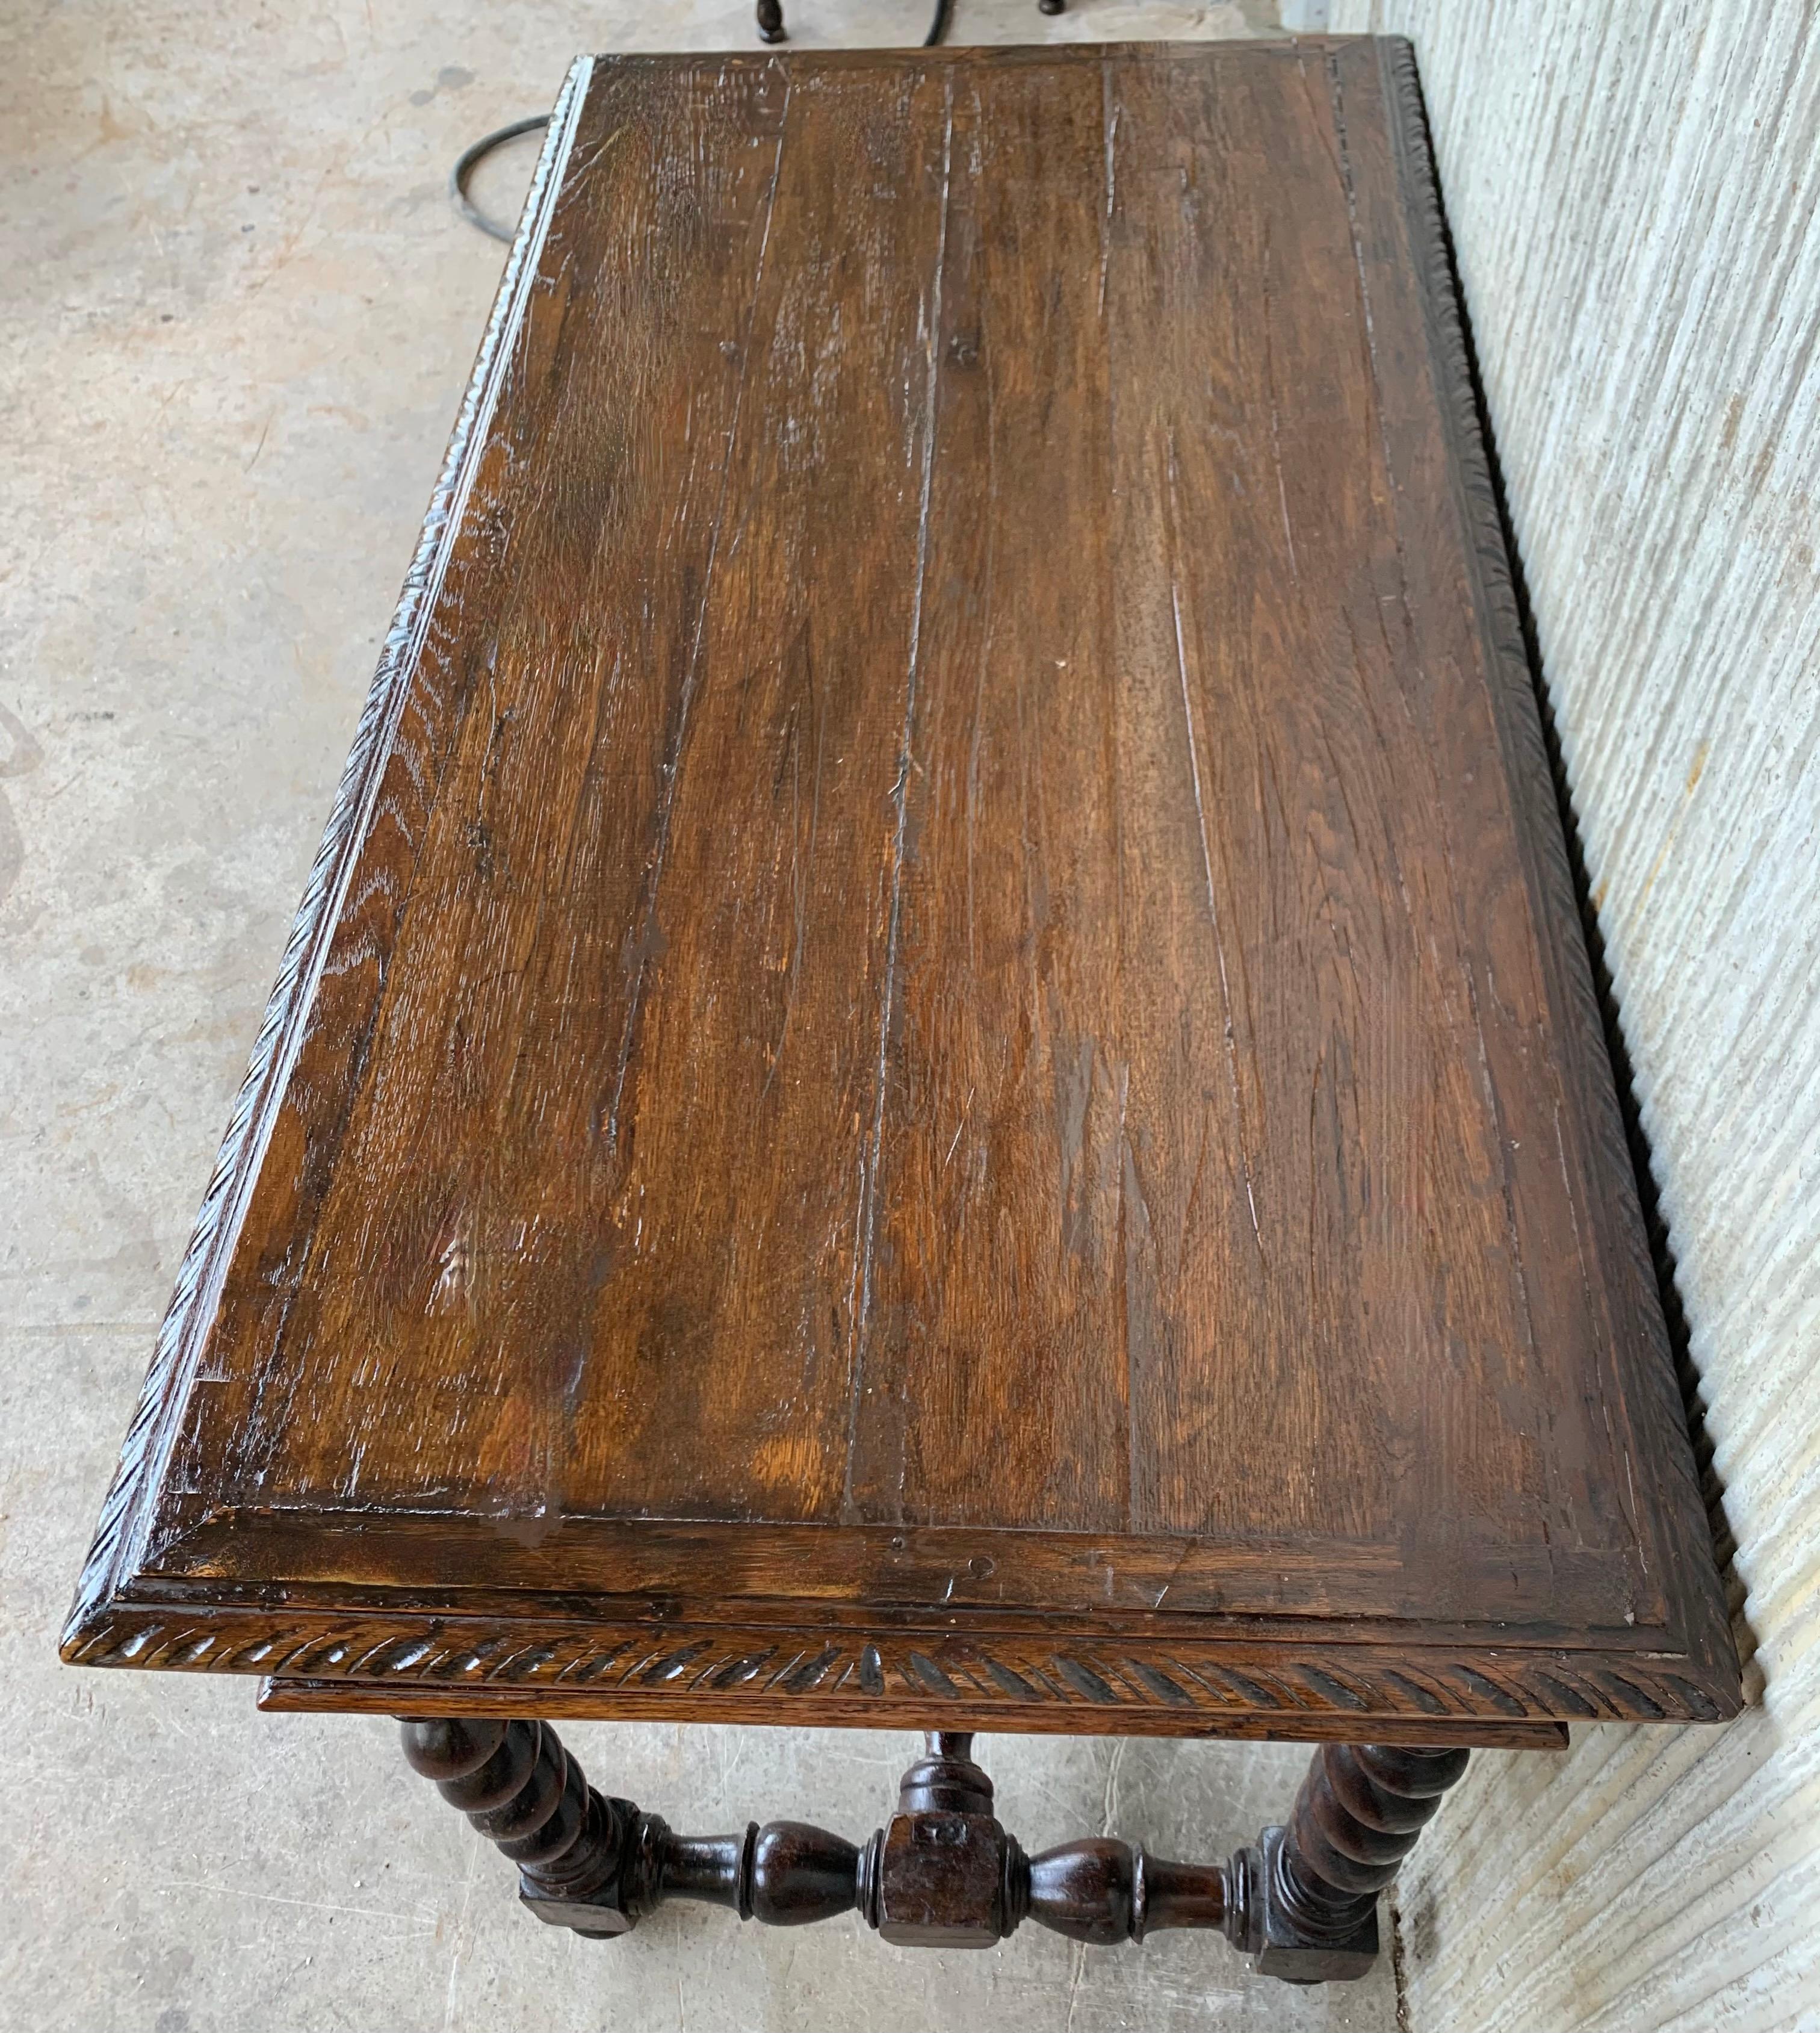 Late 19th Century 19th Spanish Walnut Desk or Console with Two Drawers and Solomonic Turning Legs